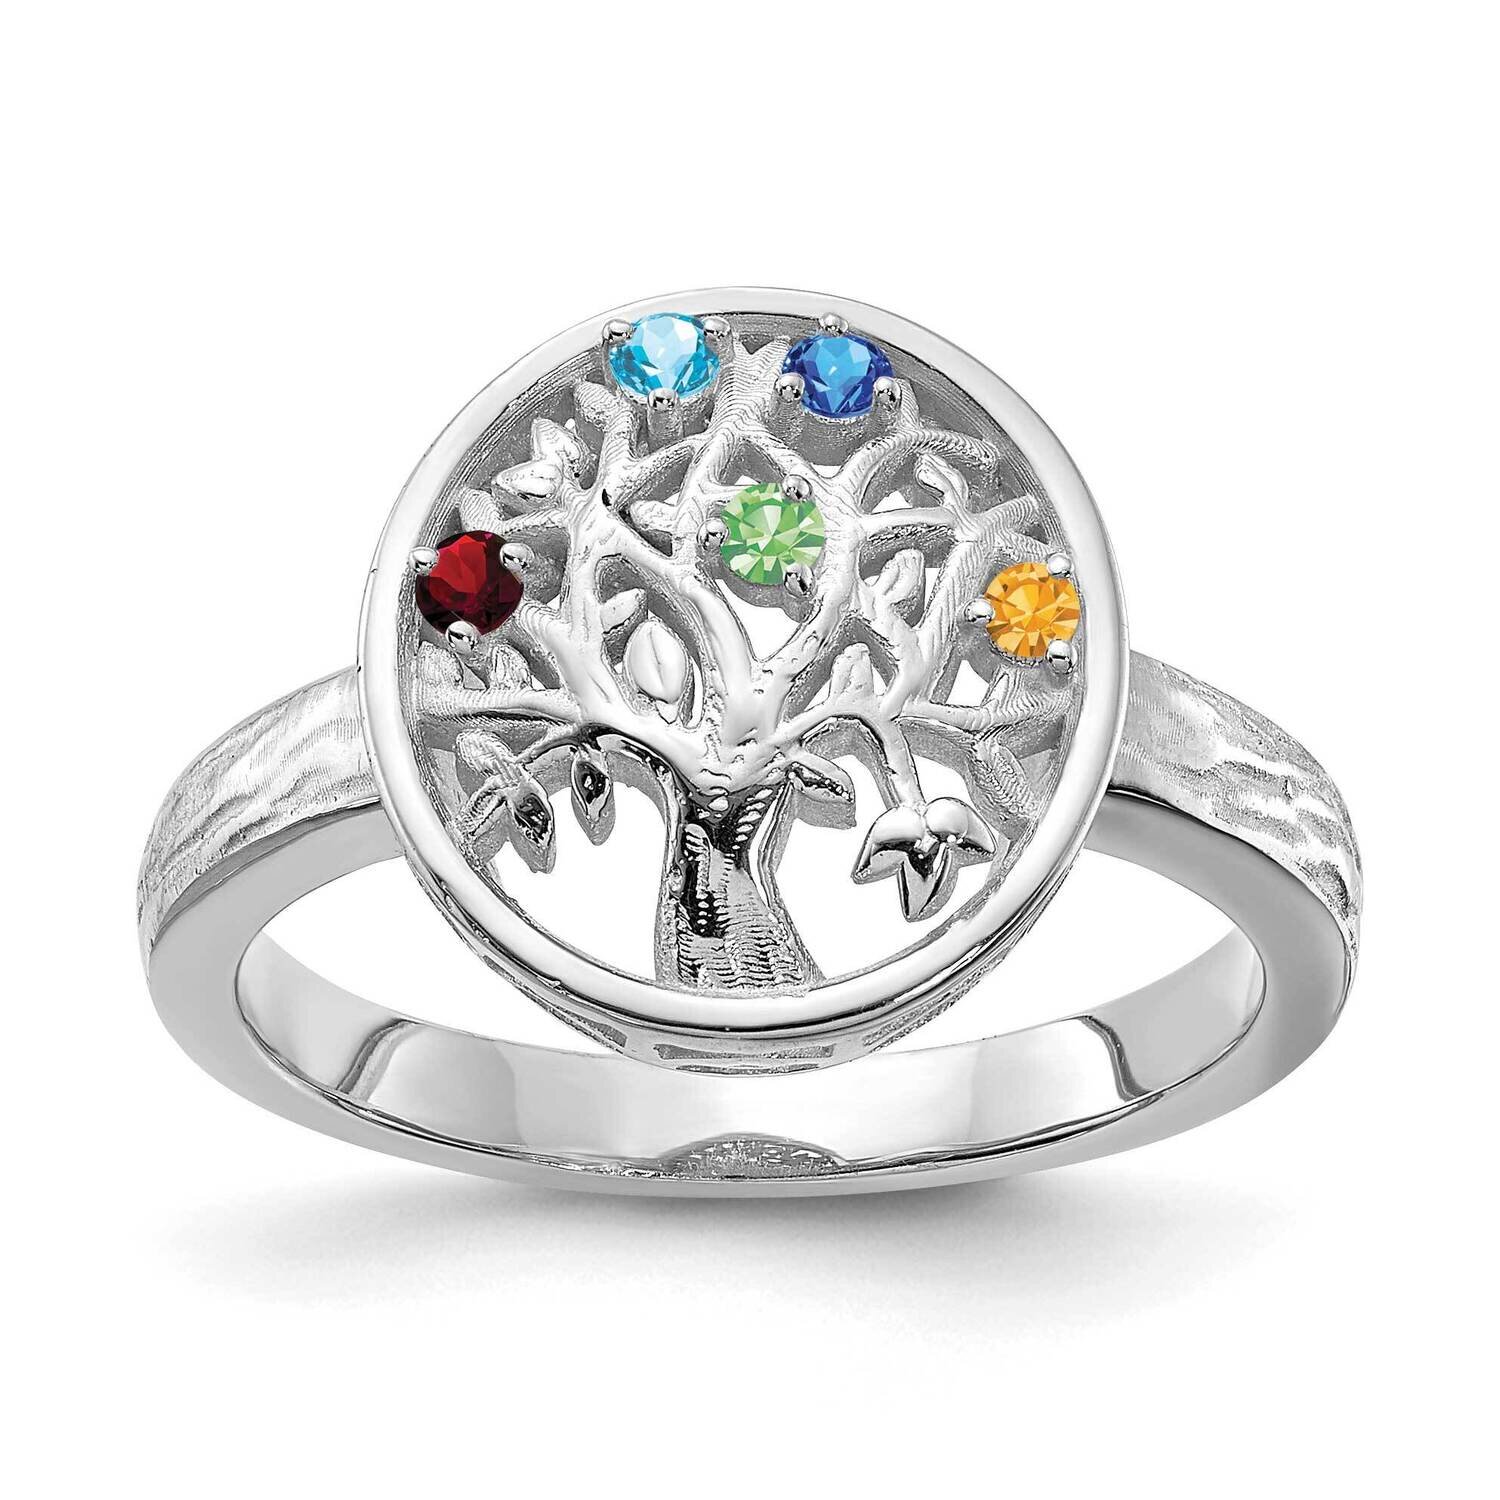 Family Tree Ring with 5 Birthstones 14k White Gold XNR85/5W